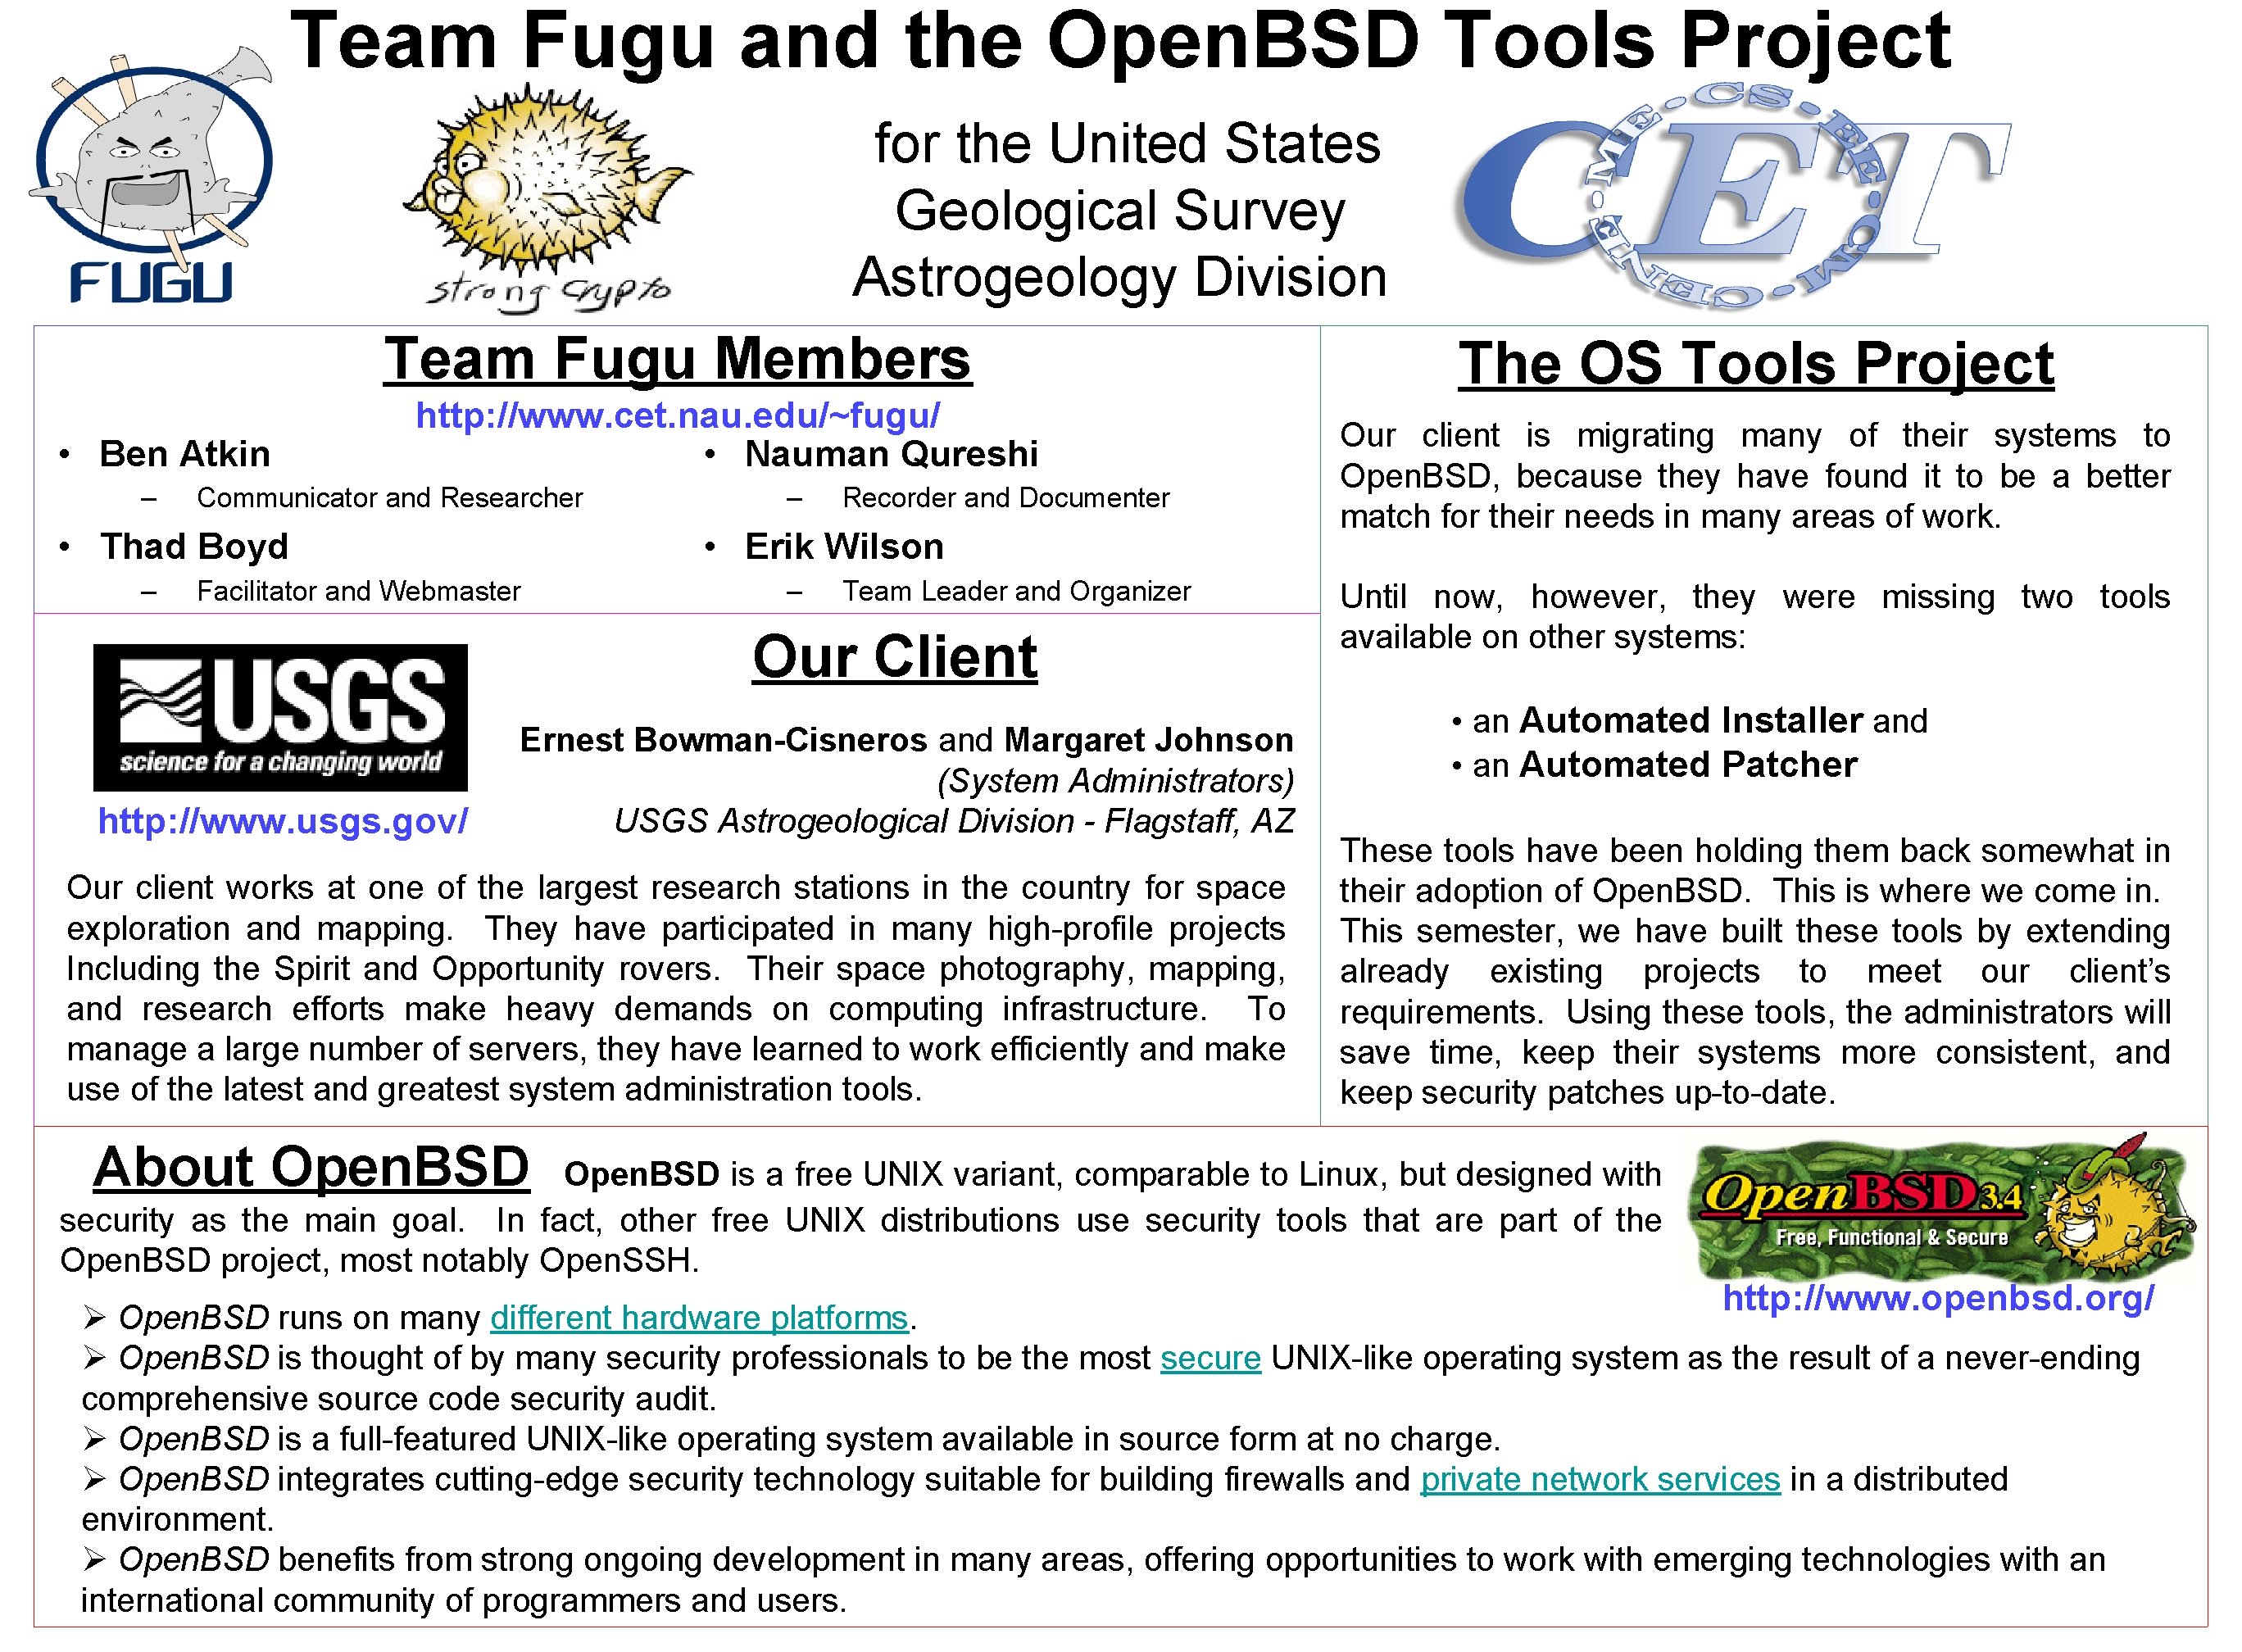 Team Fugu and the Open. BSD Tools Project for the United States Geological Survey